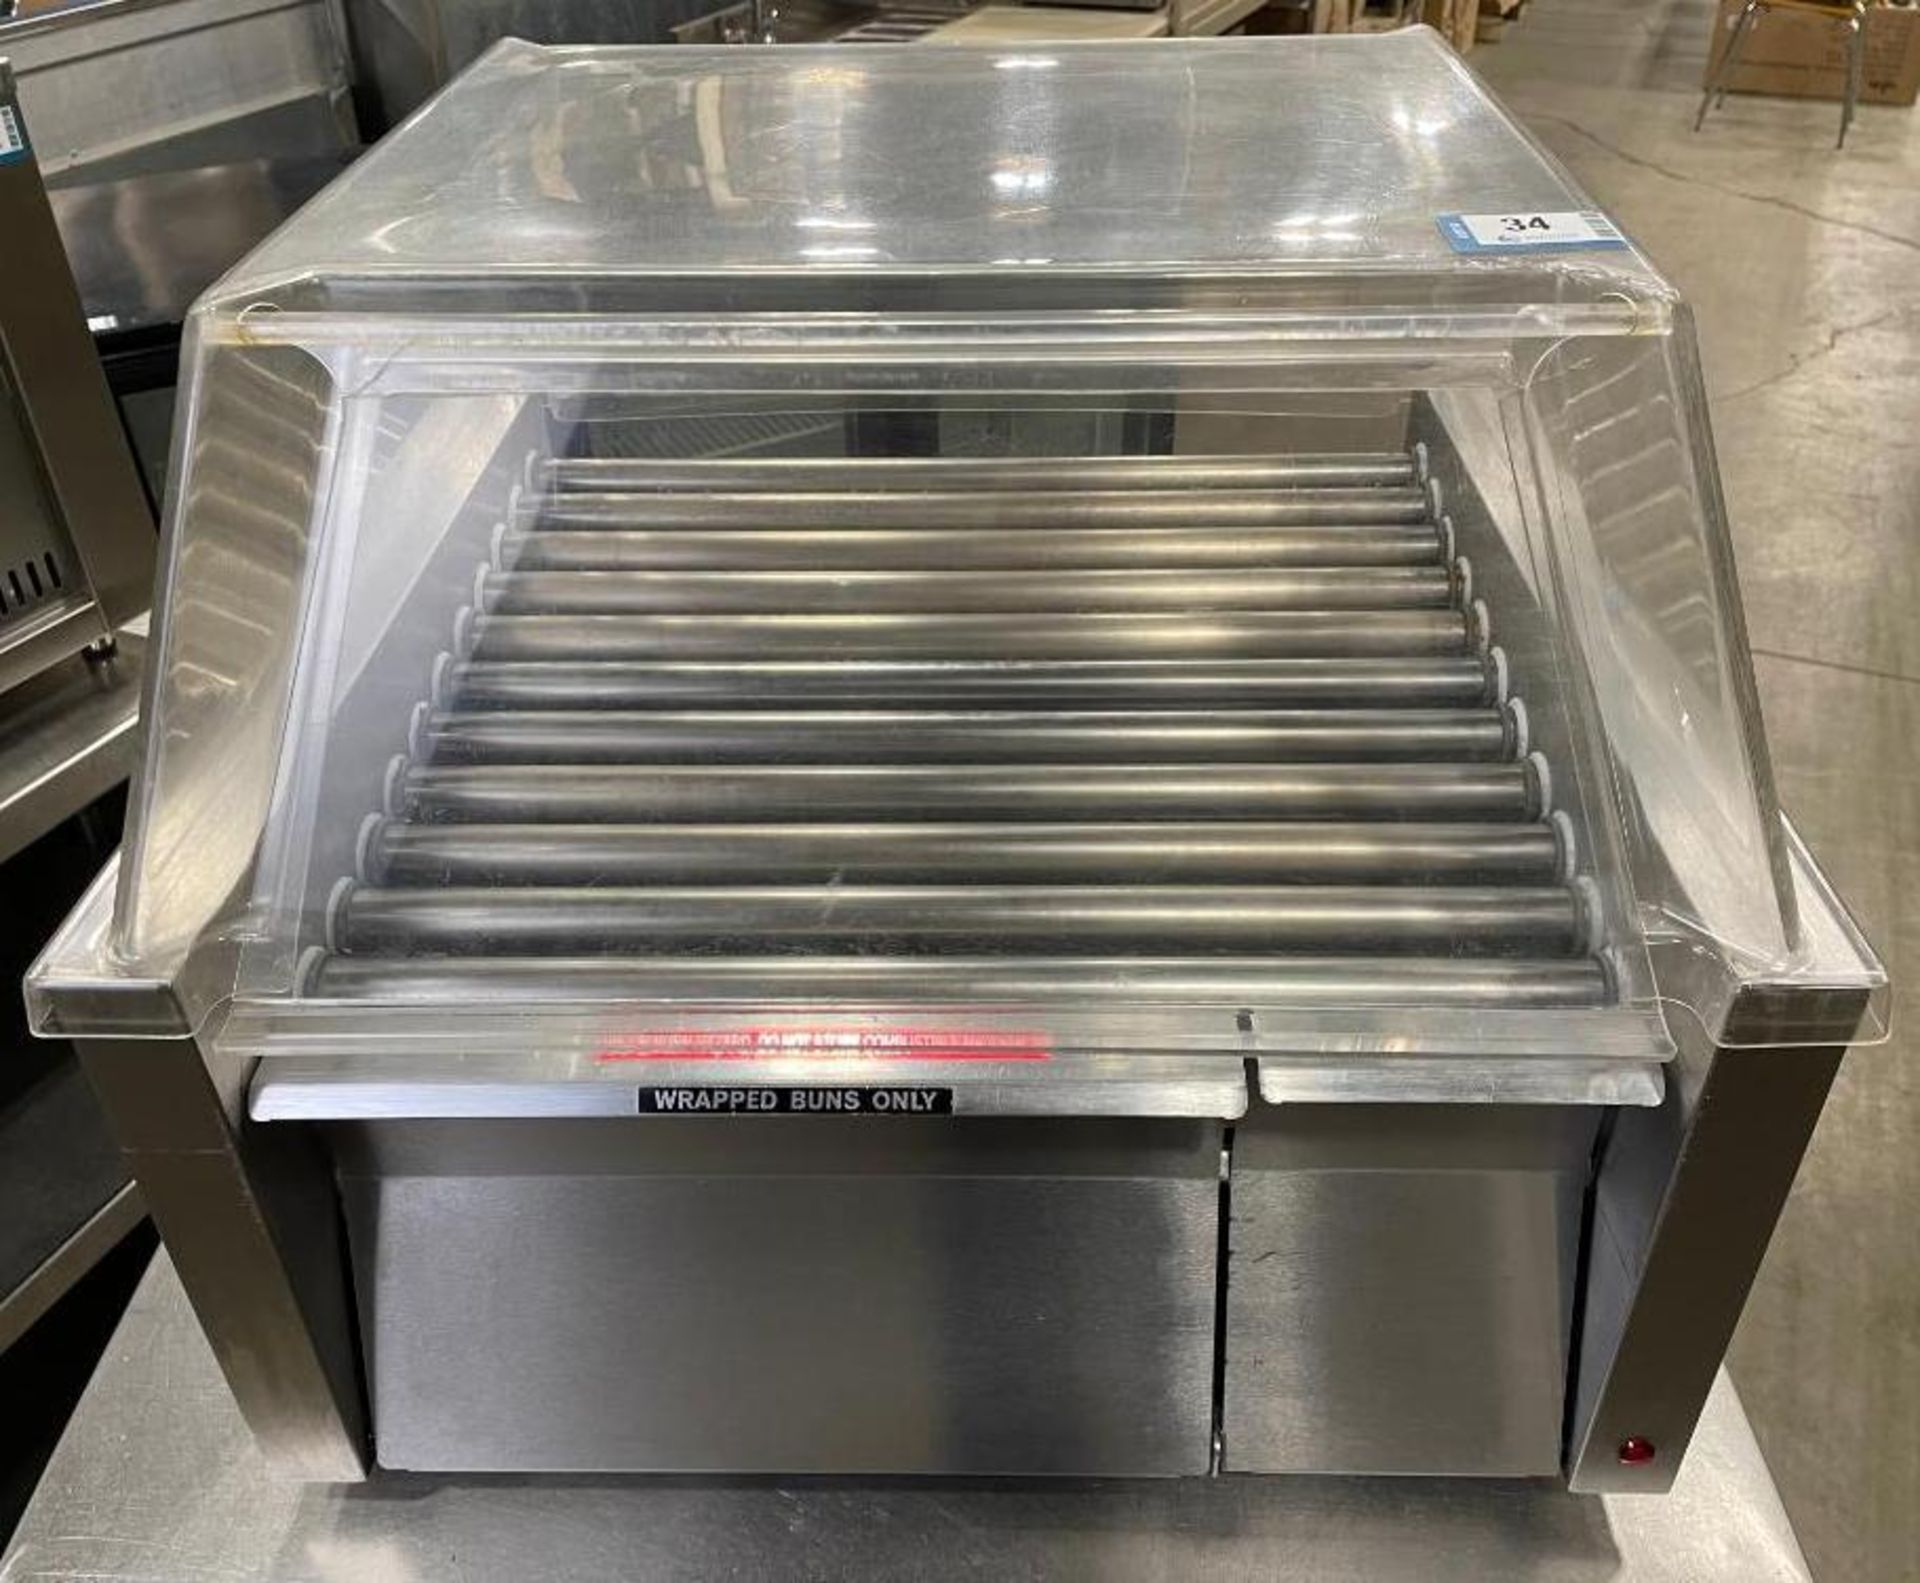 STAR GRILL-MAX 30 CHD HOT DOG ROLLER WITH BUN WARMER - Image 2 of 11